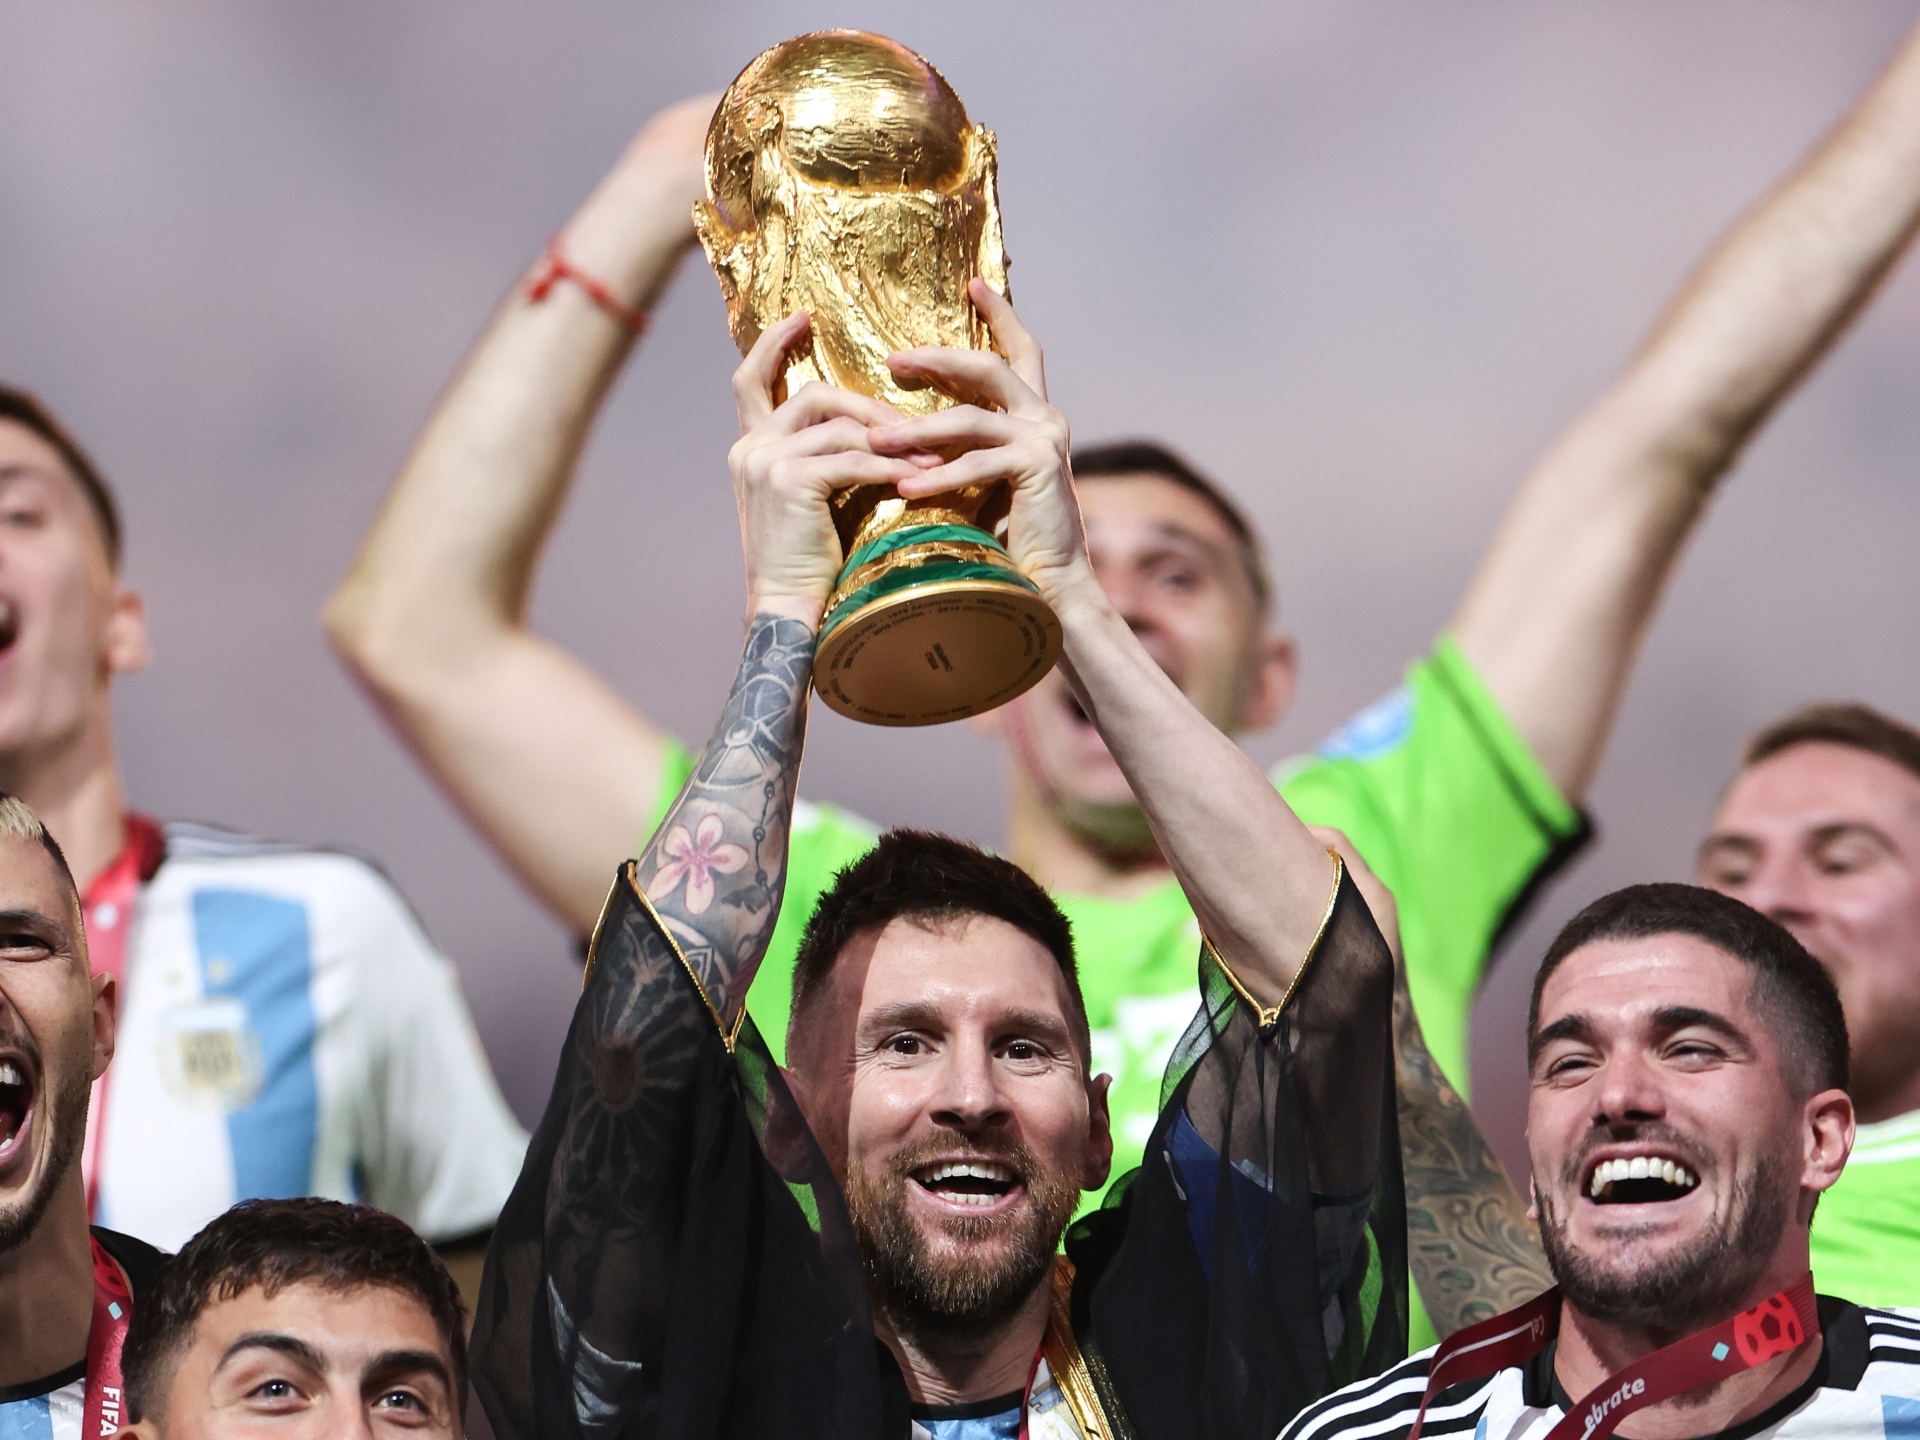 Watch as Lionel Messi dons traditional Arab robe to lift World Cup after Argentina win thrilling final vs France. The US Sun